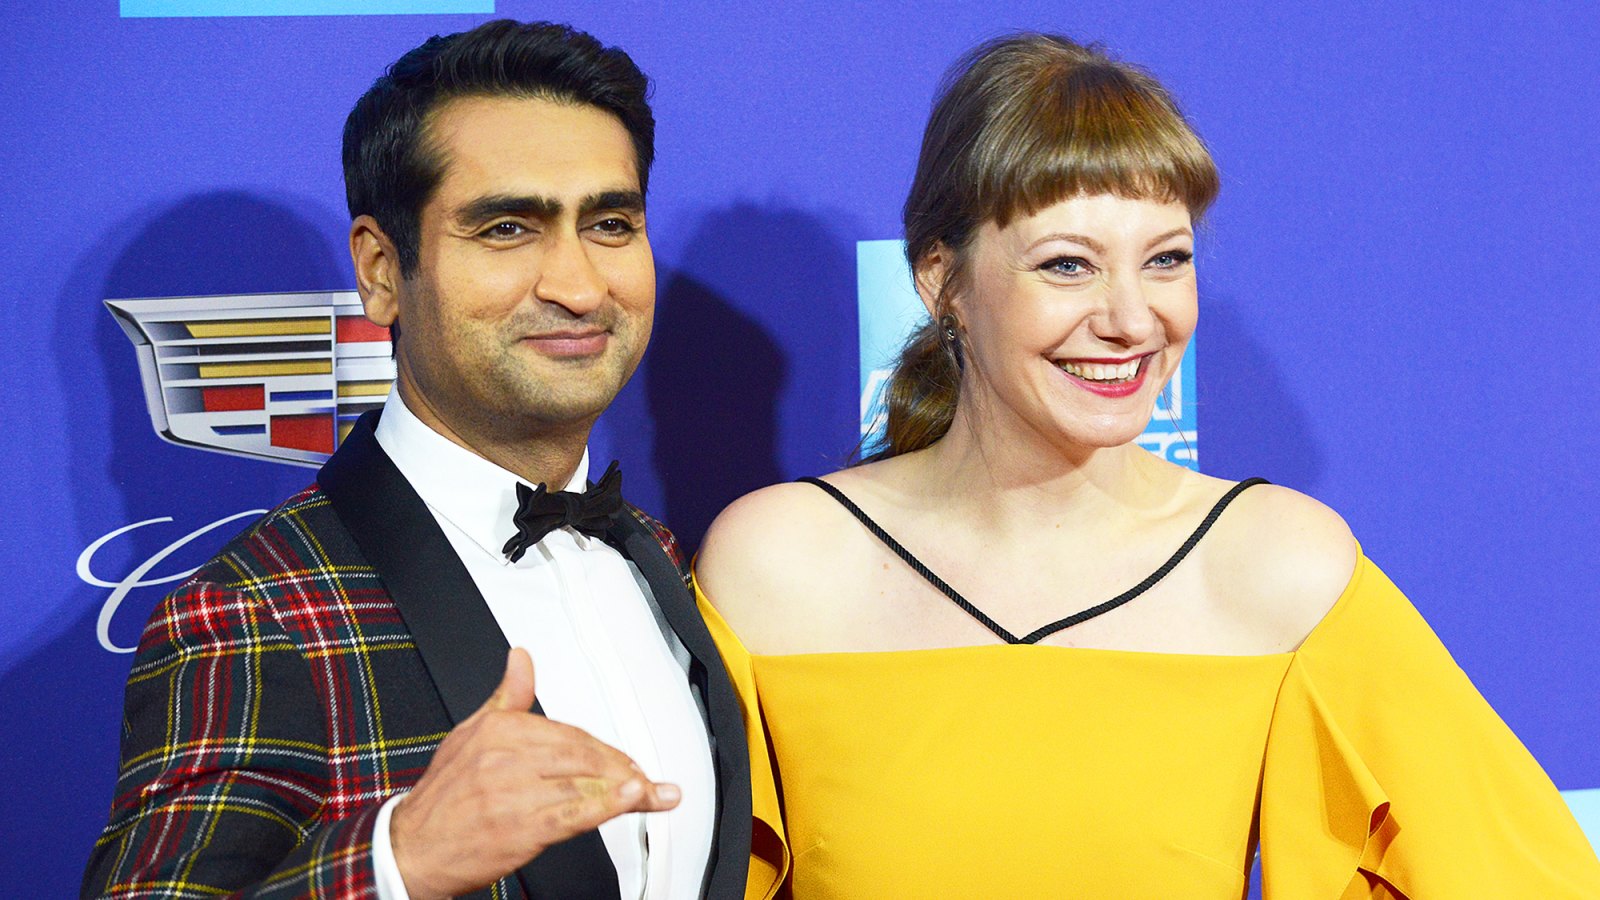 Kumail Nanjiani and Emily V. Gordon arrive for the 29th Annual Palm Springs International Film Festival Film Awards Gala held at Palm Springs Convention Center in Palm Springs, California.